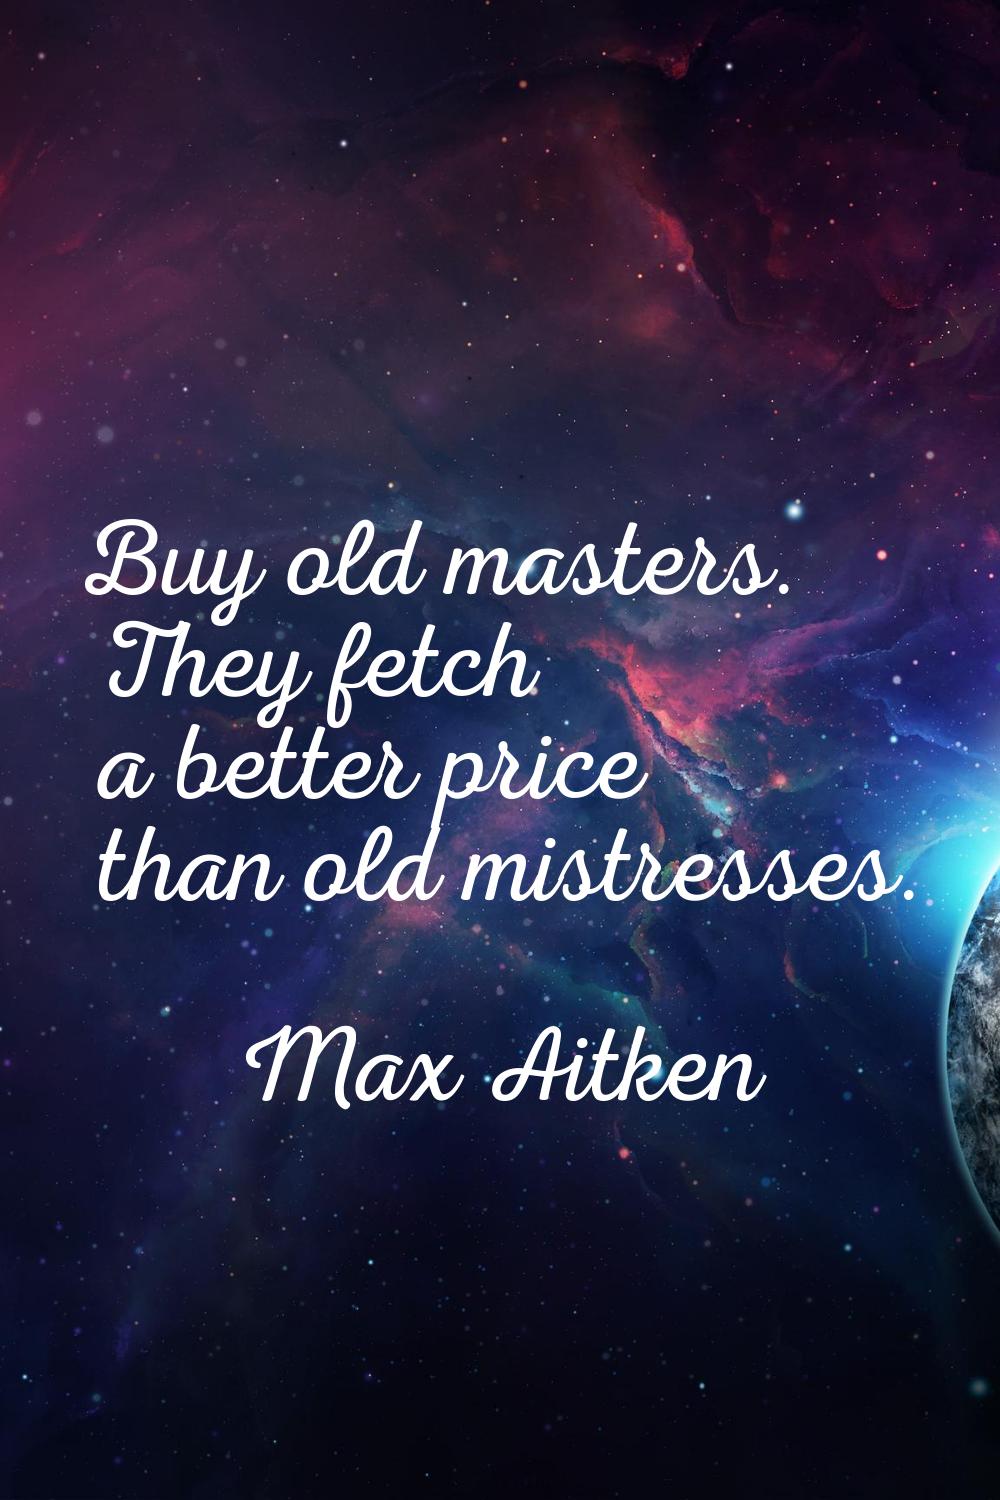 Buy old masters. They fetch a better price than old mistresses.